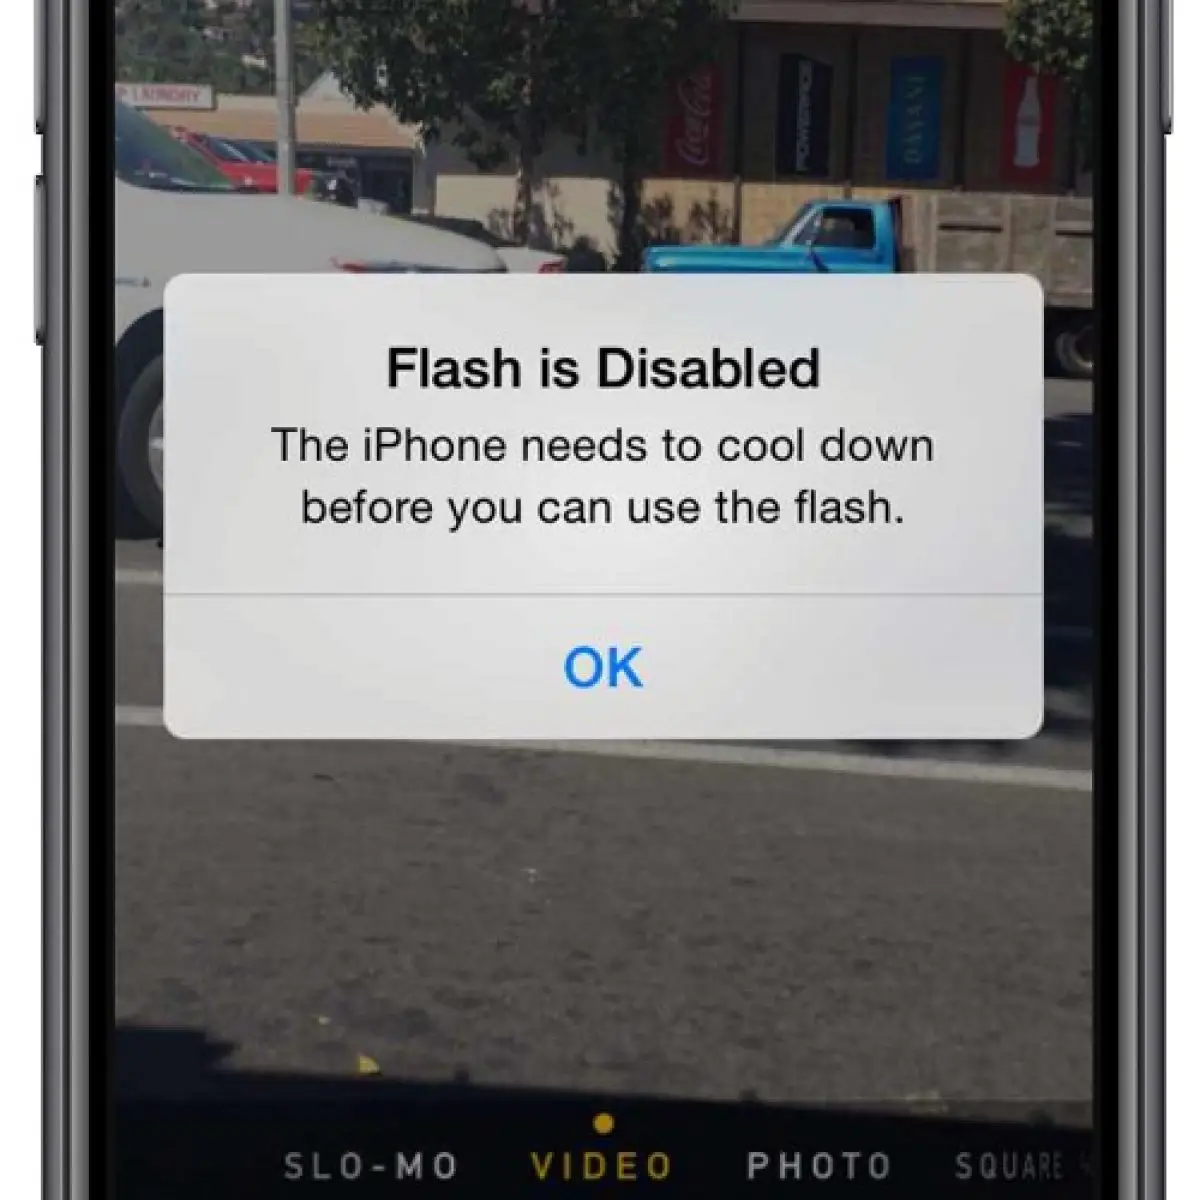 How To Fix The Flash Is Diabled Iphone Error